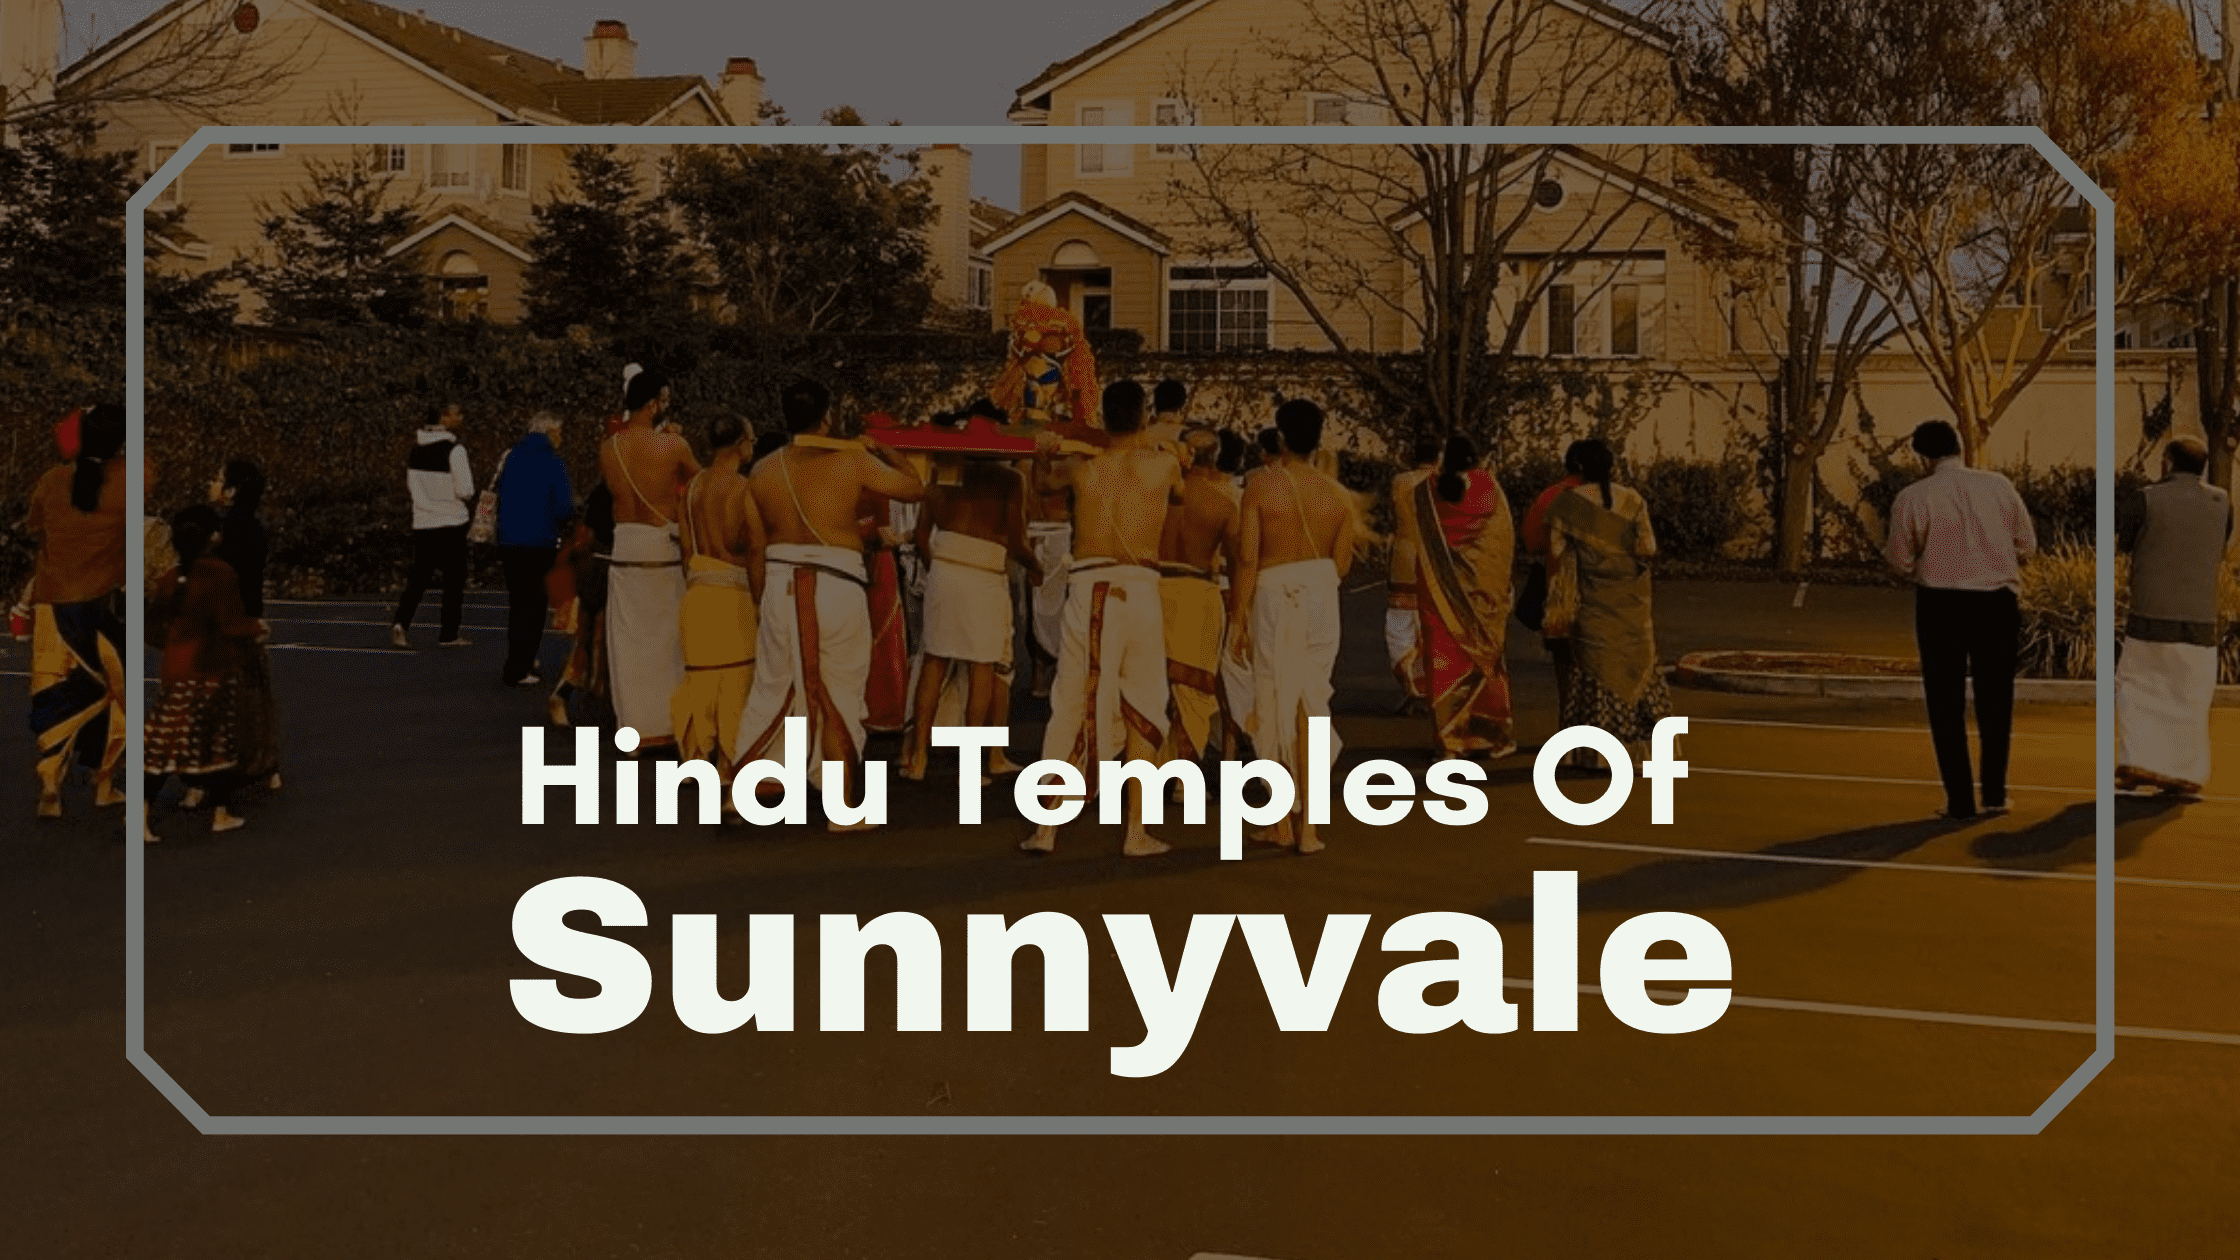 9 Sunnyvale Hindu Temple That You Must Not Miss » Indielogy Magazine